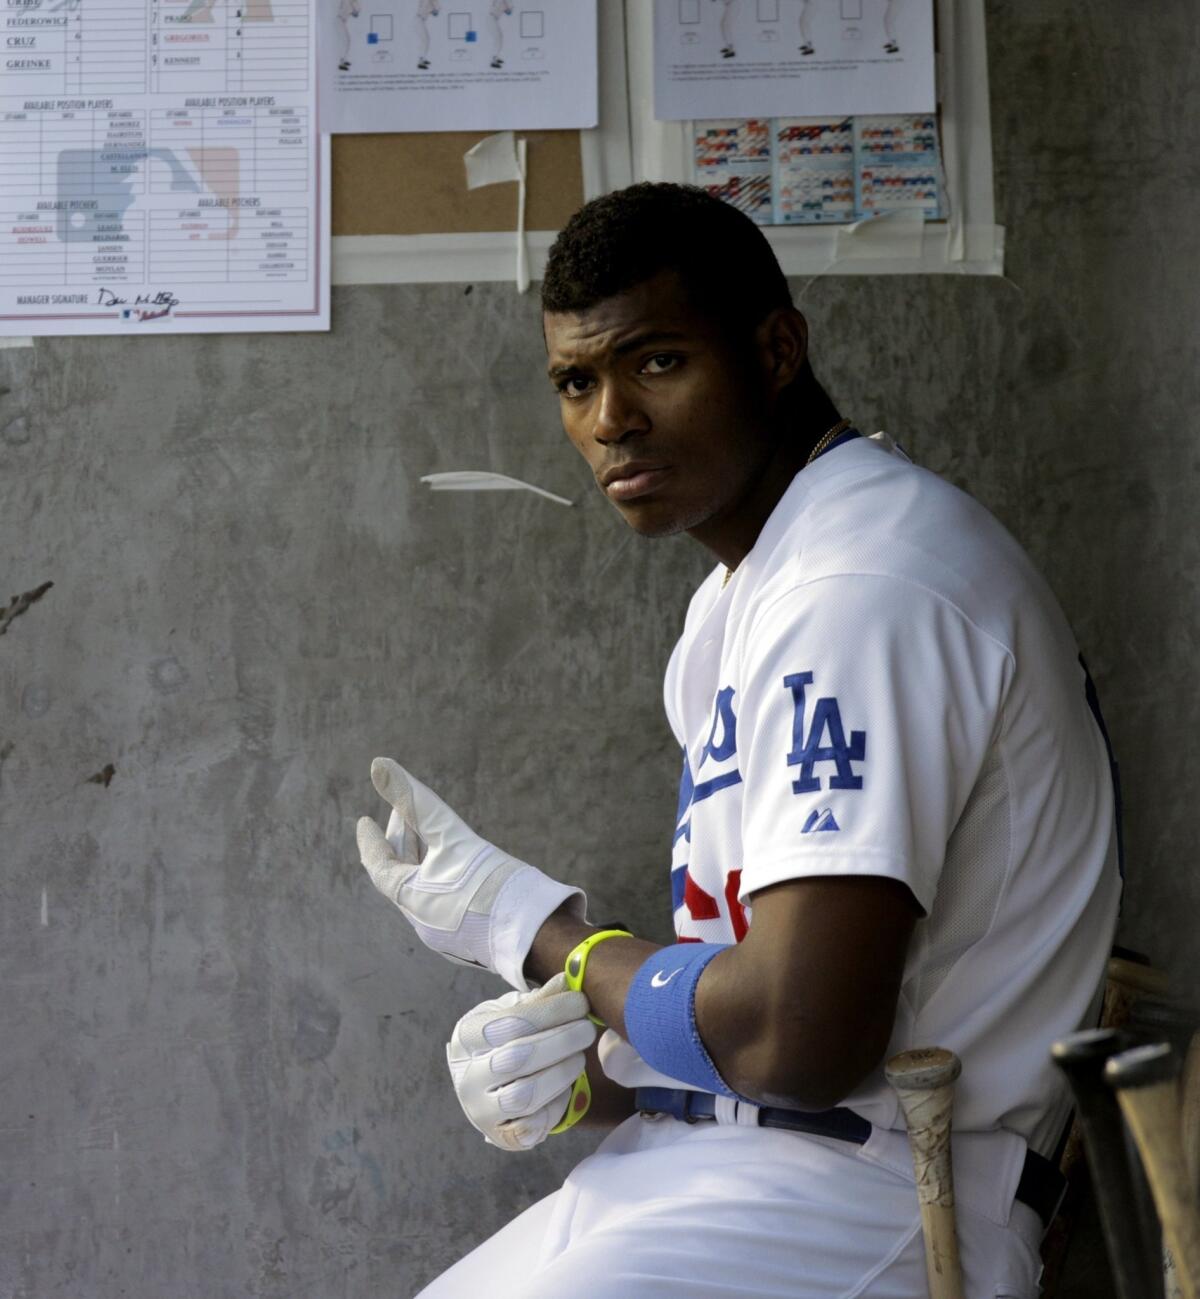 Dodgers right fielder Yasiel Puig had a remarkable first season in Los Angeles, but it wasn't enough to earn him the 2013 National League rookie of the year award.